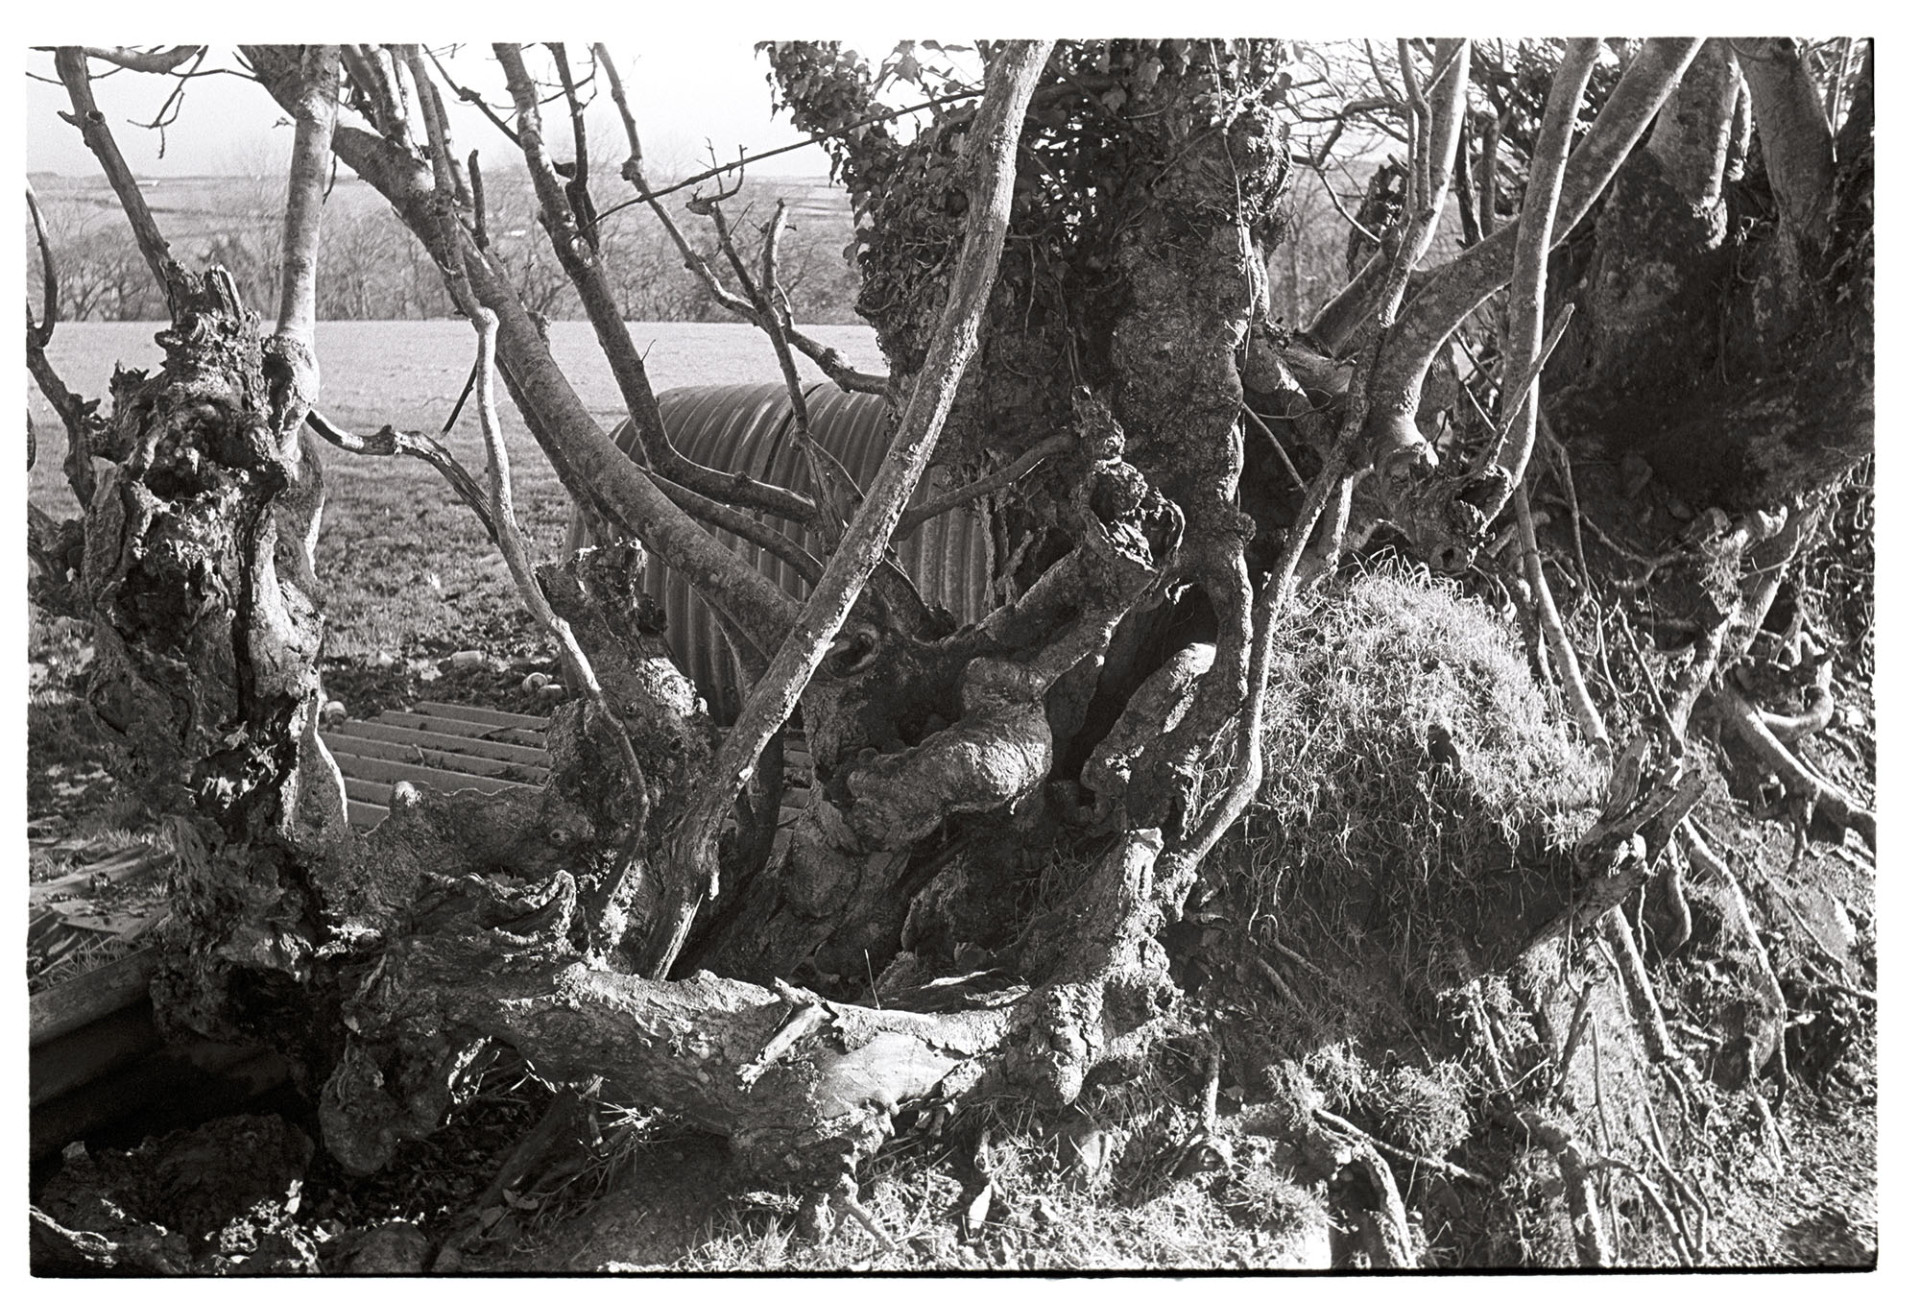 Gnarled tree roots in hedge overgrown. 
[Gnarled tree roots in a hedge at Ashwell, Dolton. A sheet of corrugated iron can be seen in the field on the far side of the hedge.]